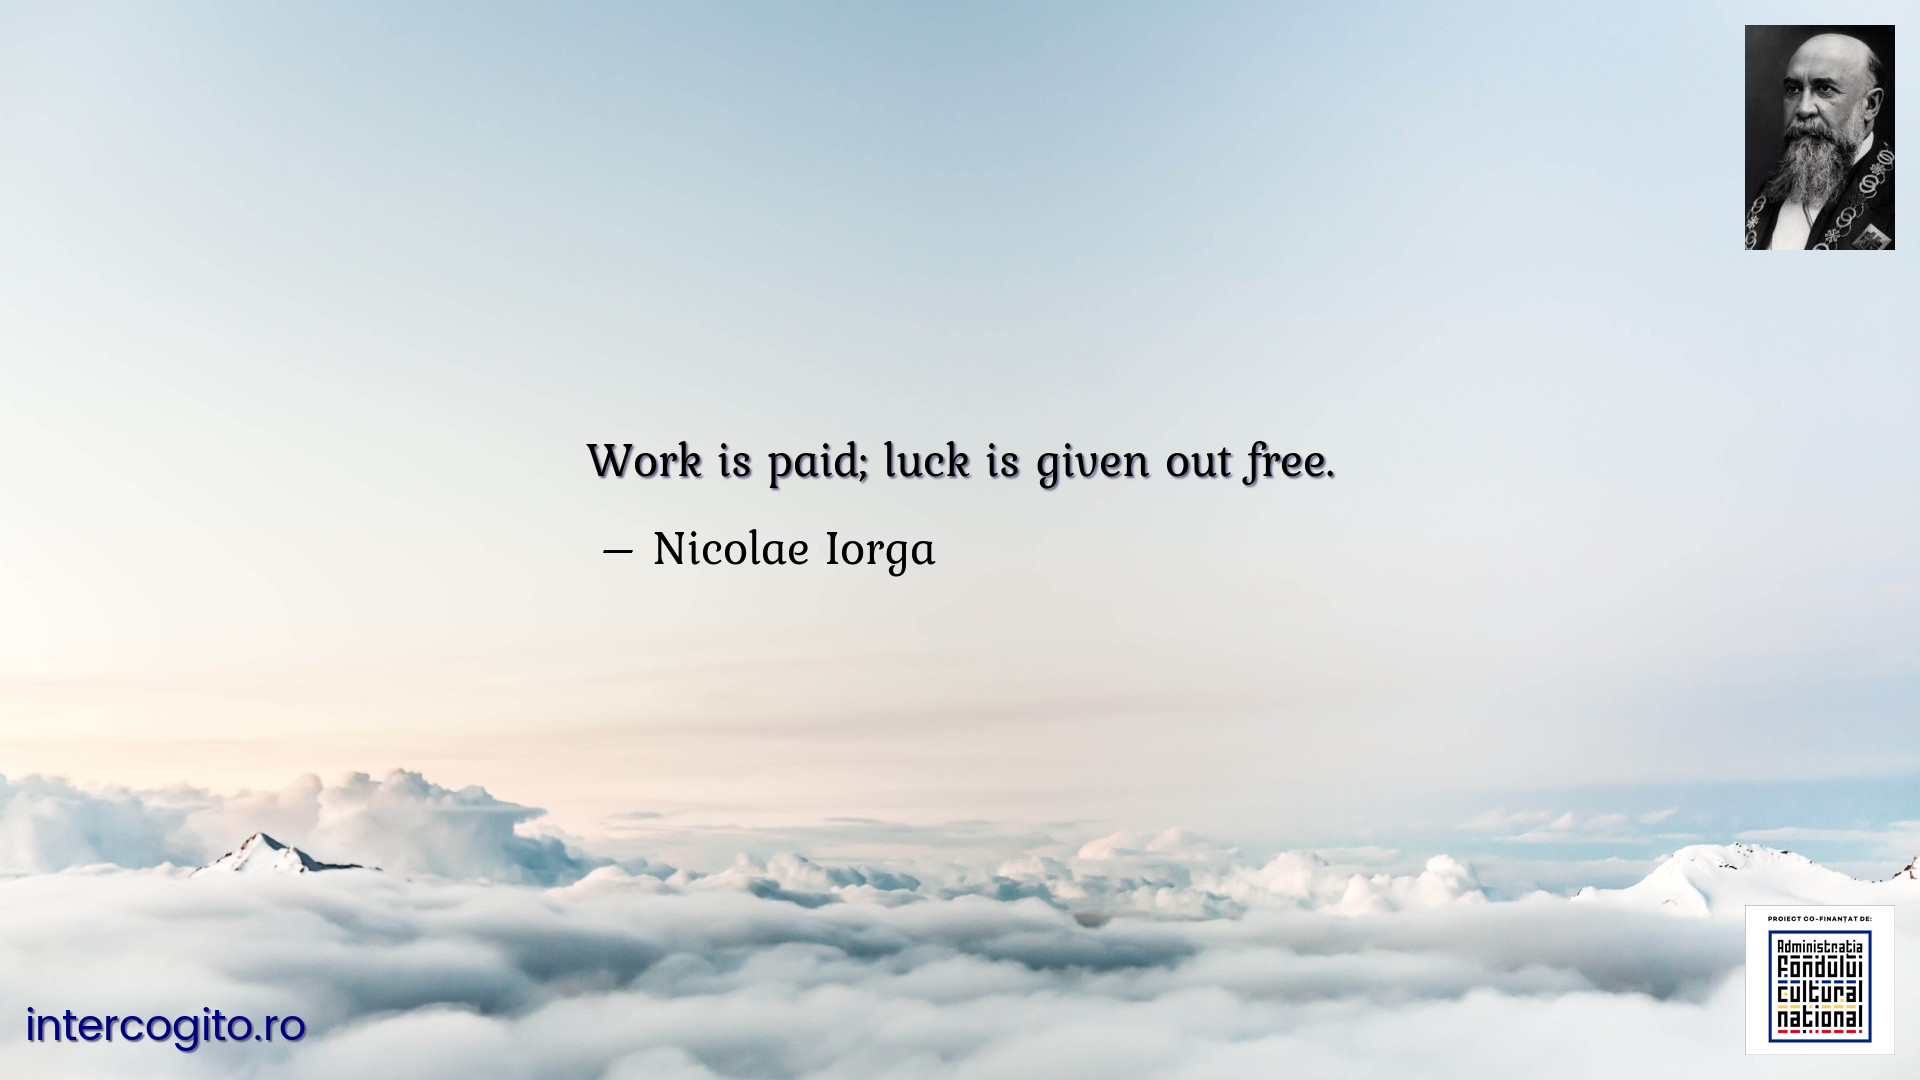 Work is paid; luck is given out free.